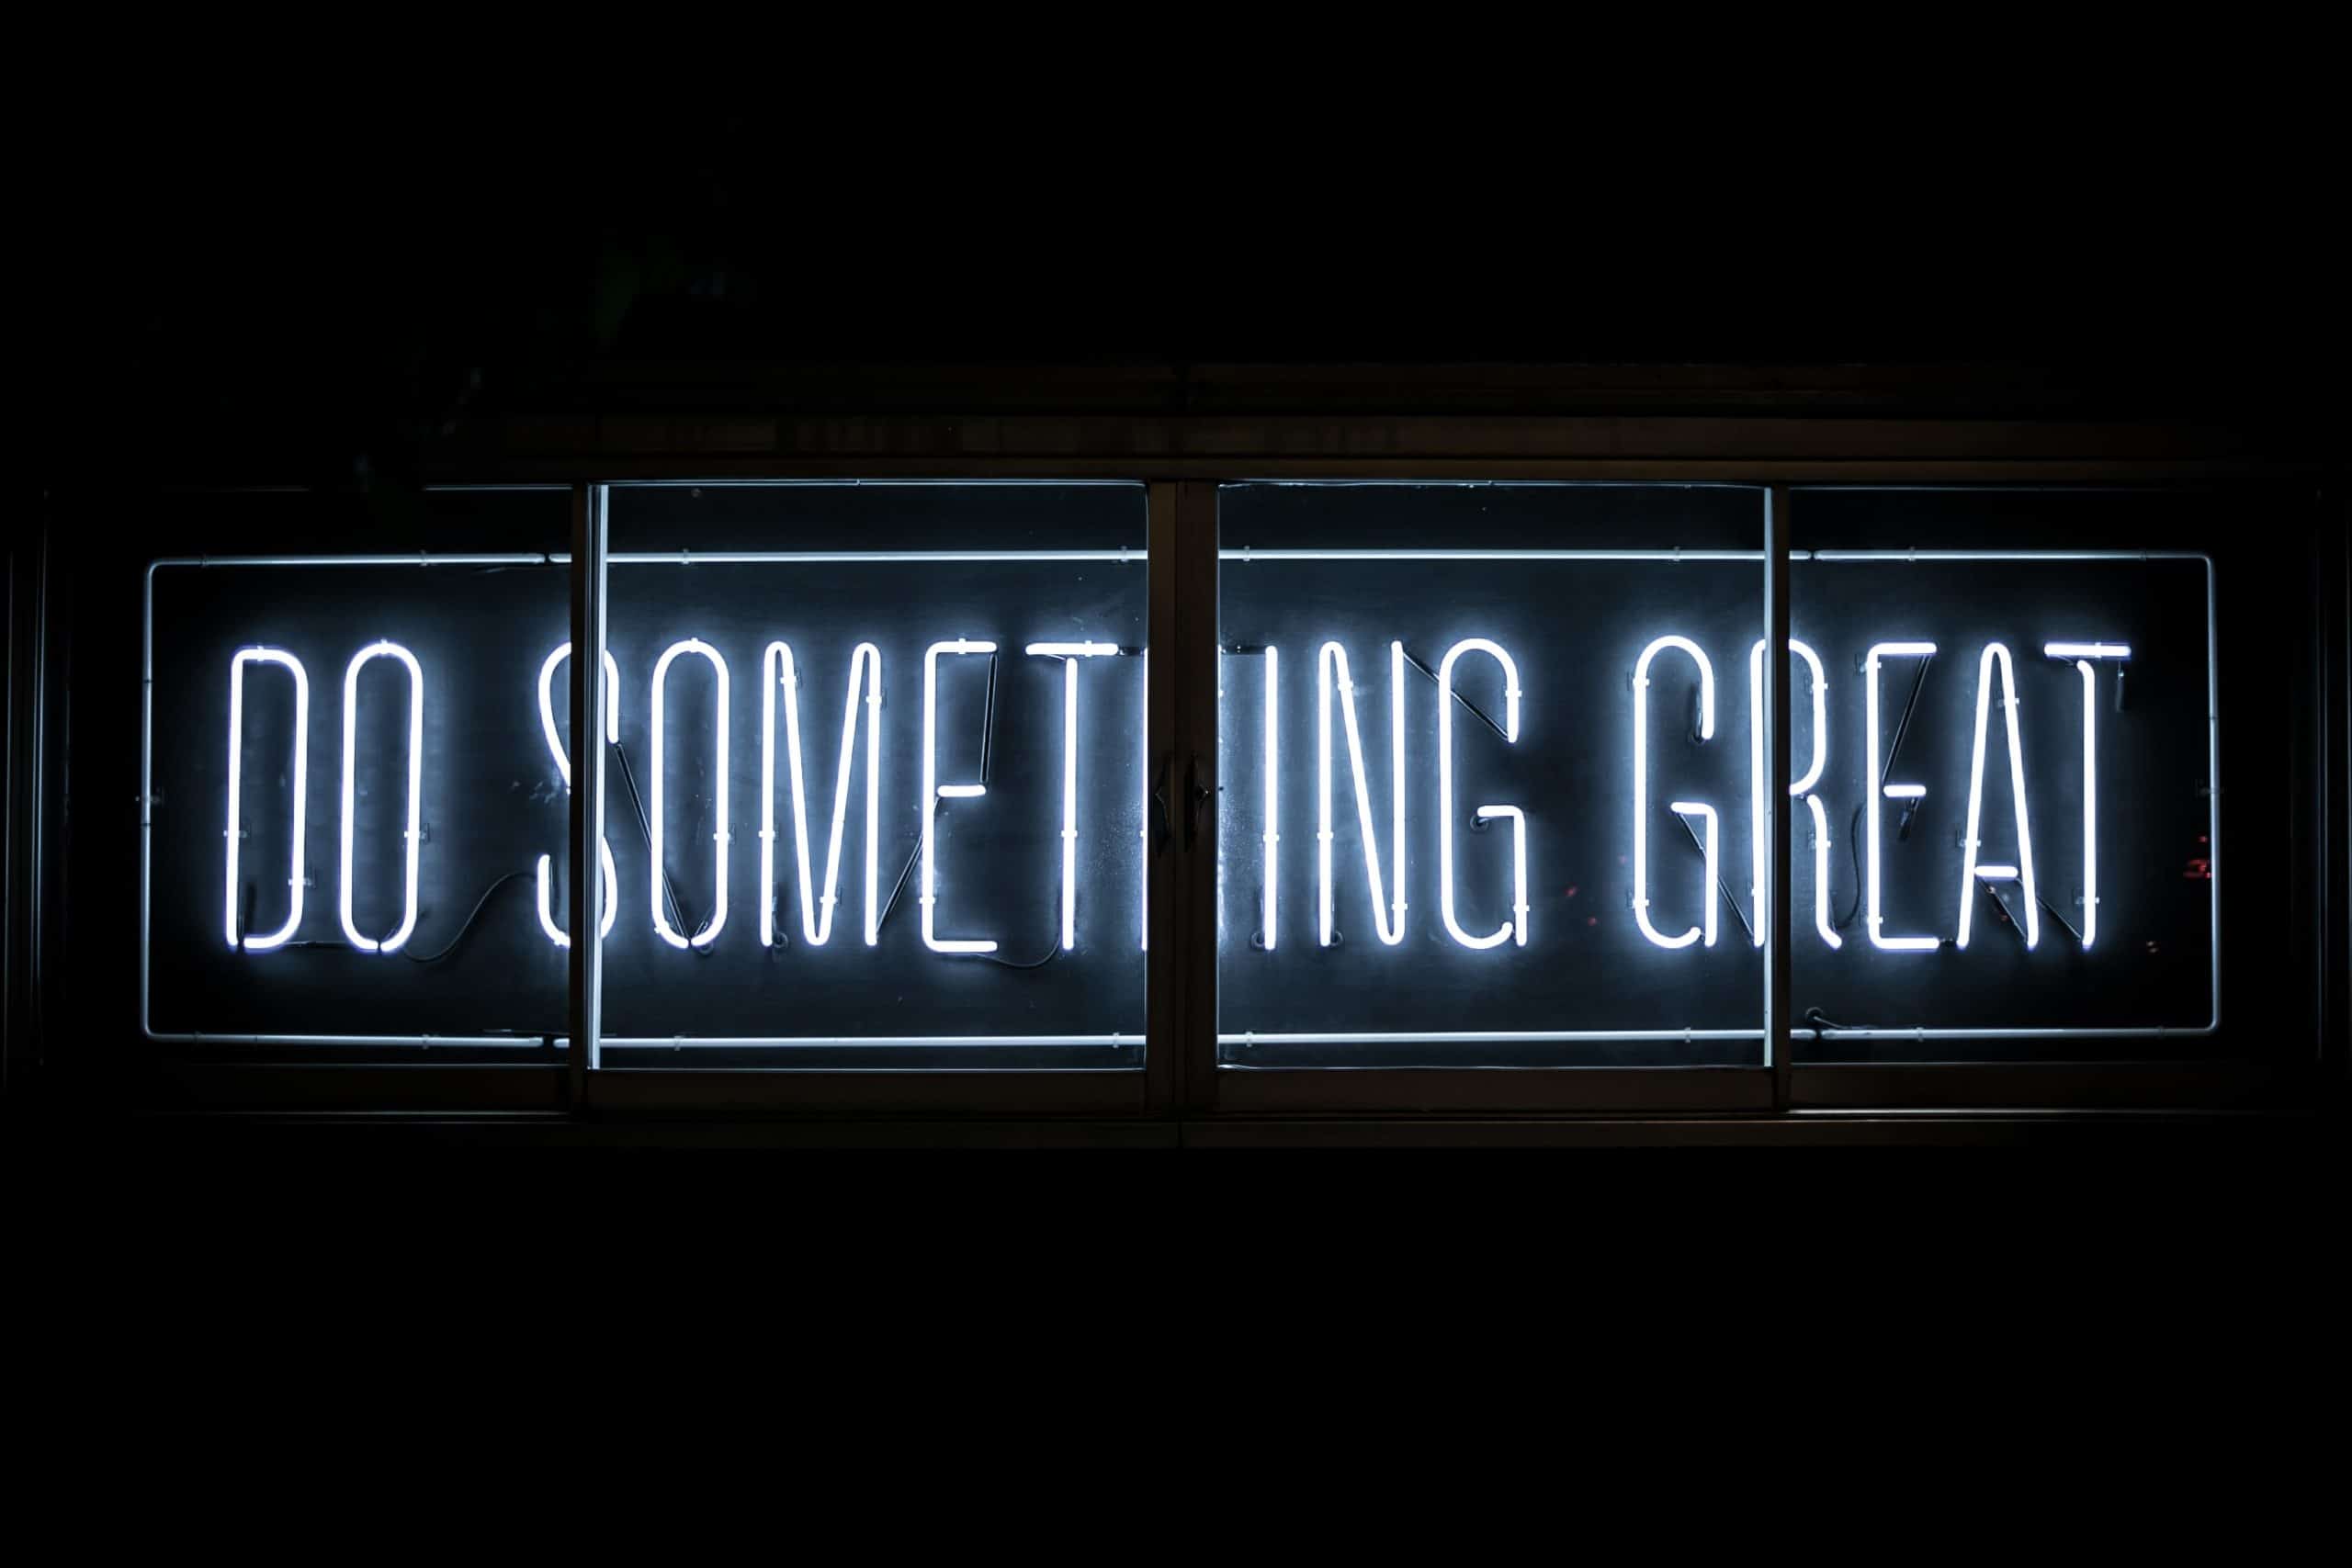 Do something great in neon lights